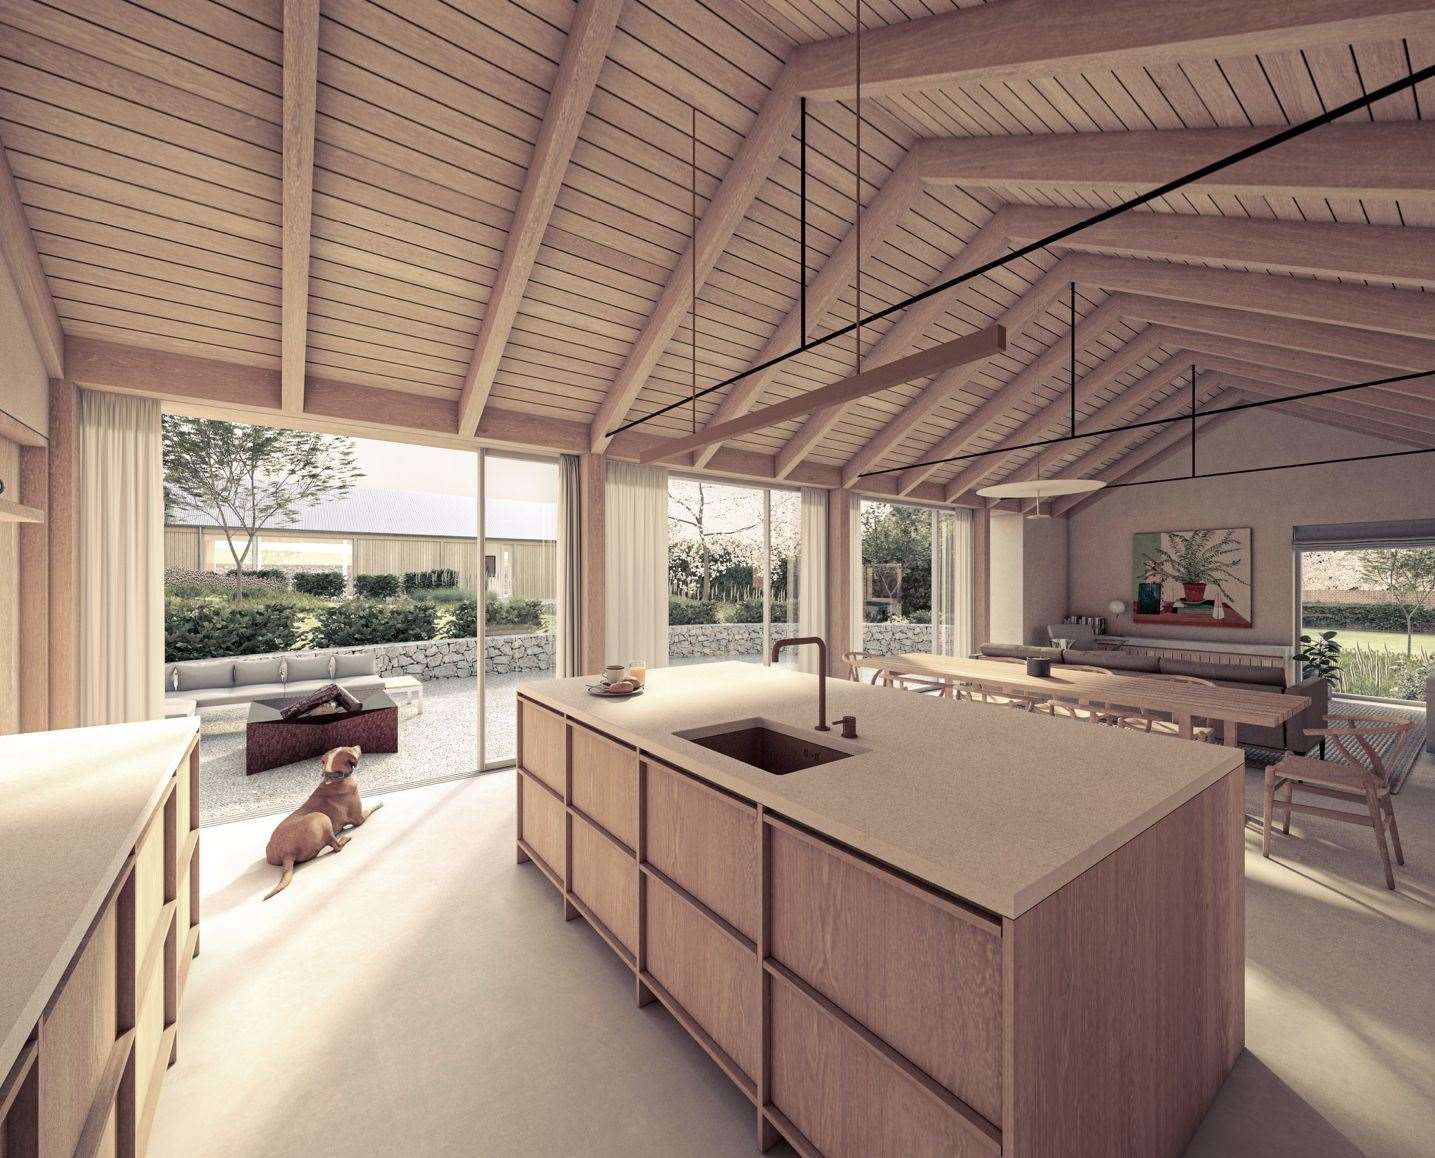 How architects envisage one of the lets could look. Picture: TaylorHare Architects